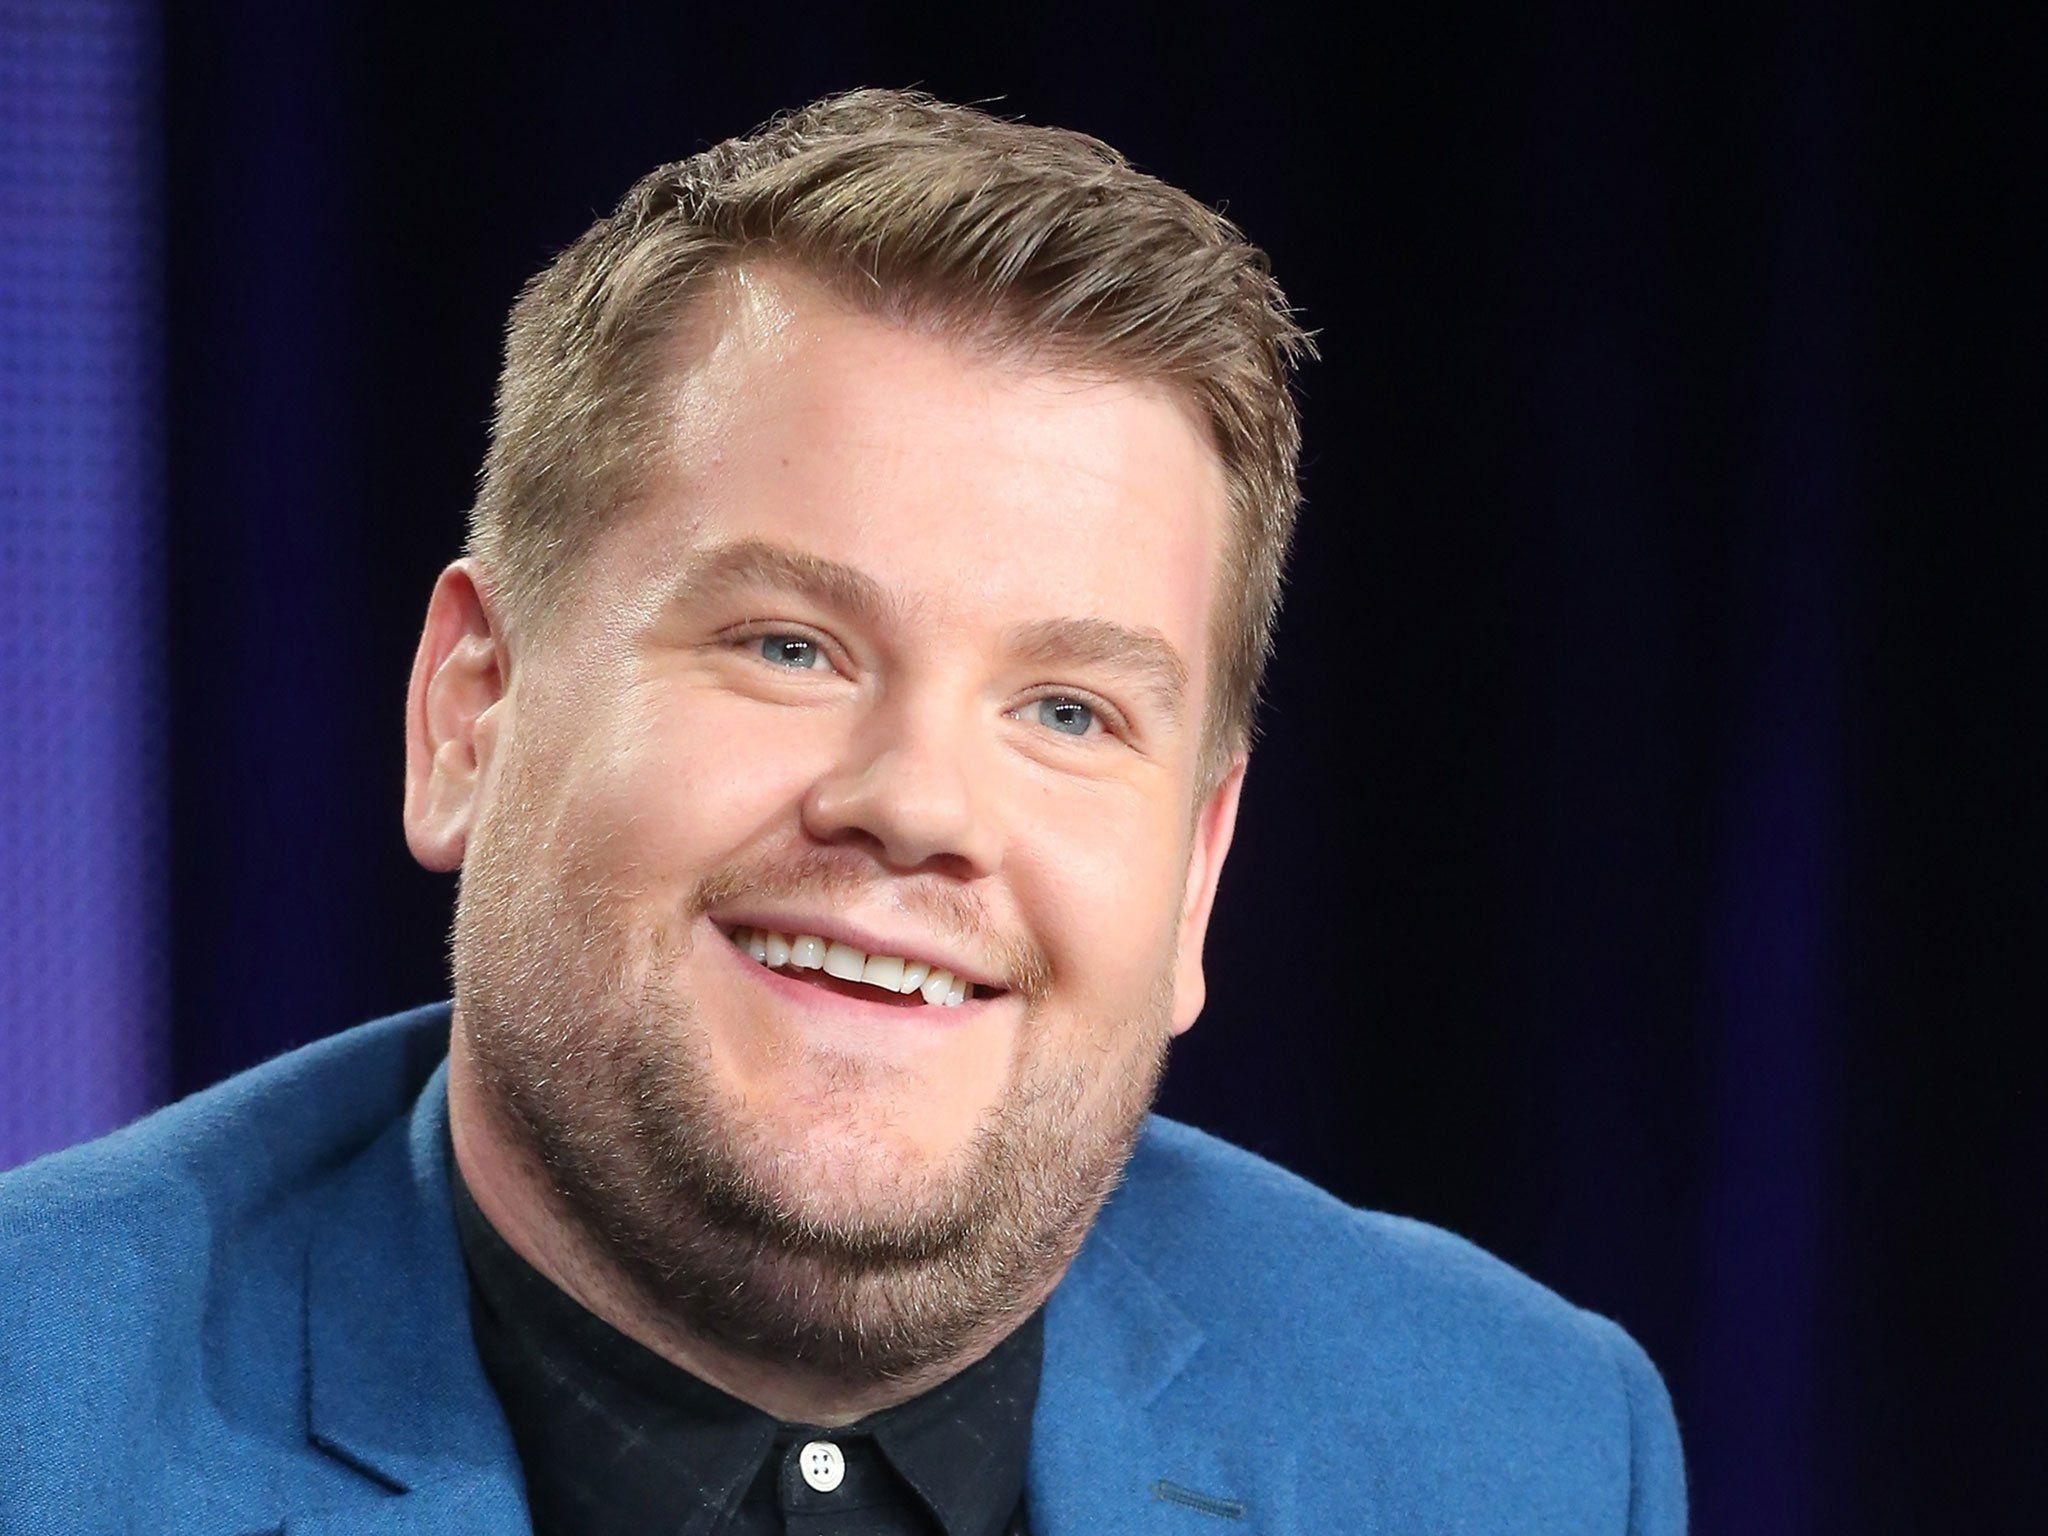 James Corden's The Late Late Show is coming to Sky in the UK